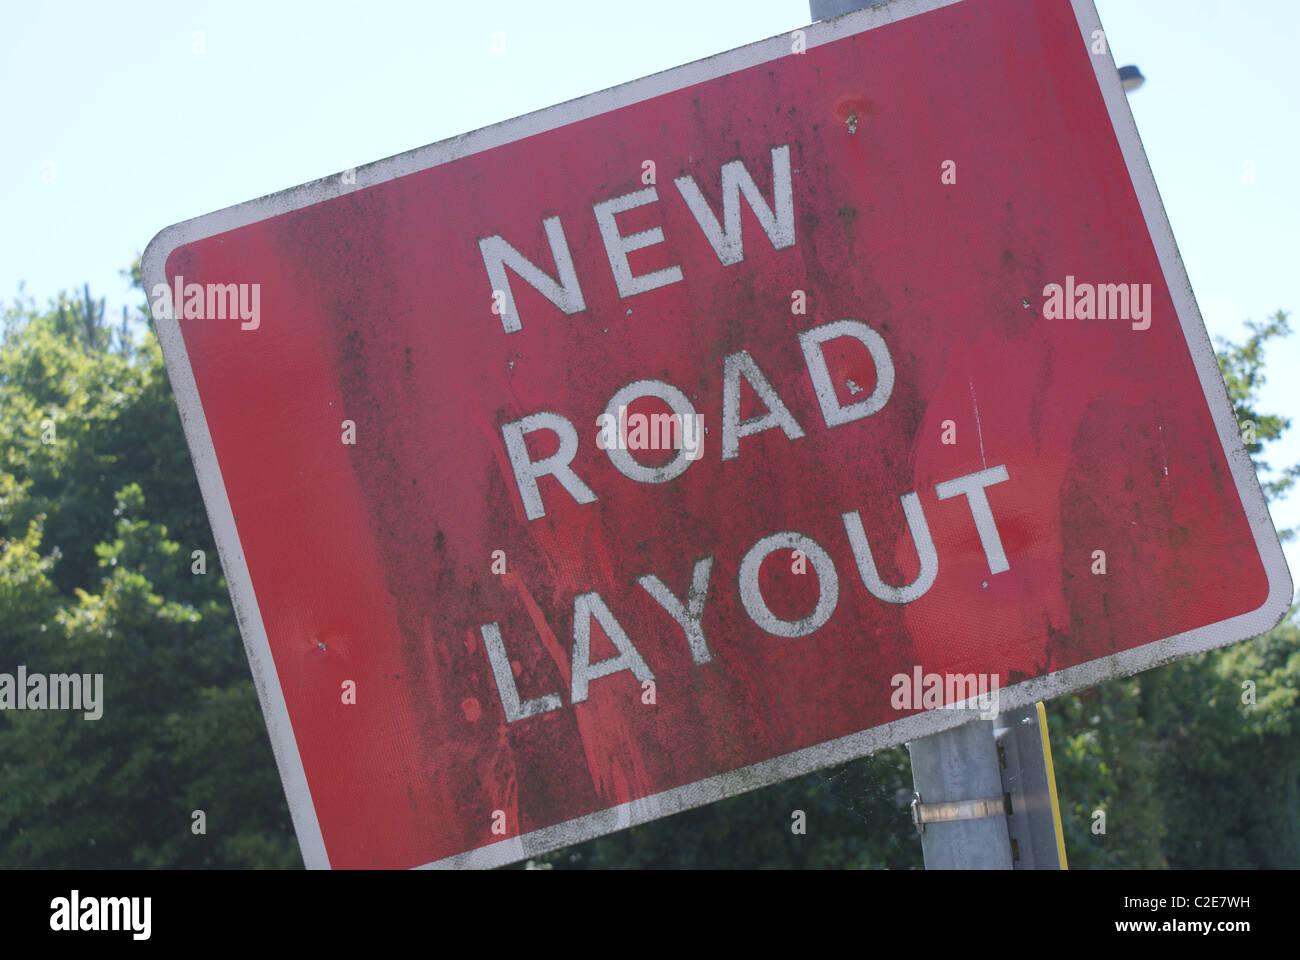 New road layout sign Stock Photo